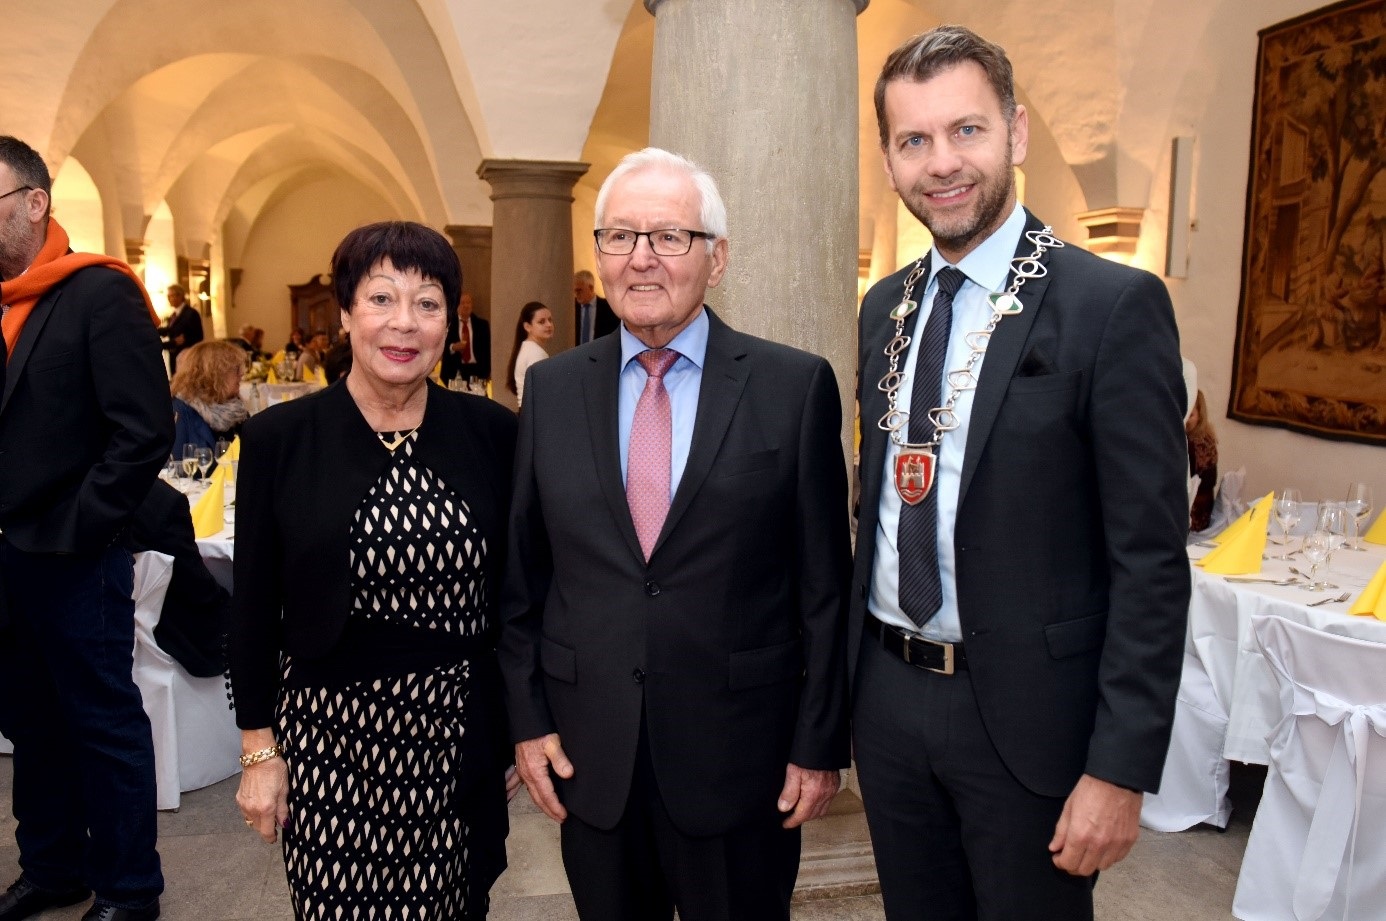 Dr.-Ing. e.h. Udo Willi Kögler with his wife and Lord Mayor Dennis Weilmann; Photo: Lars Landmann